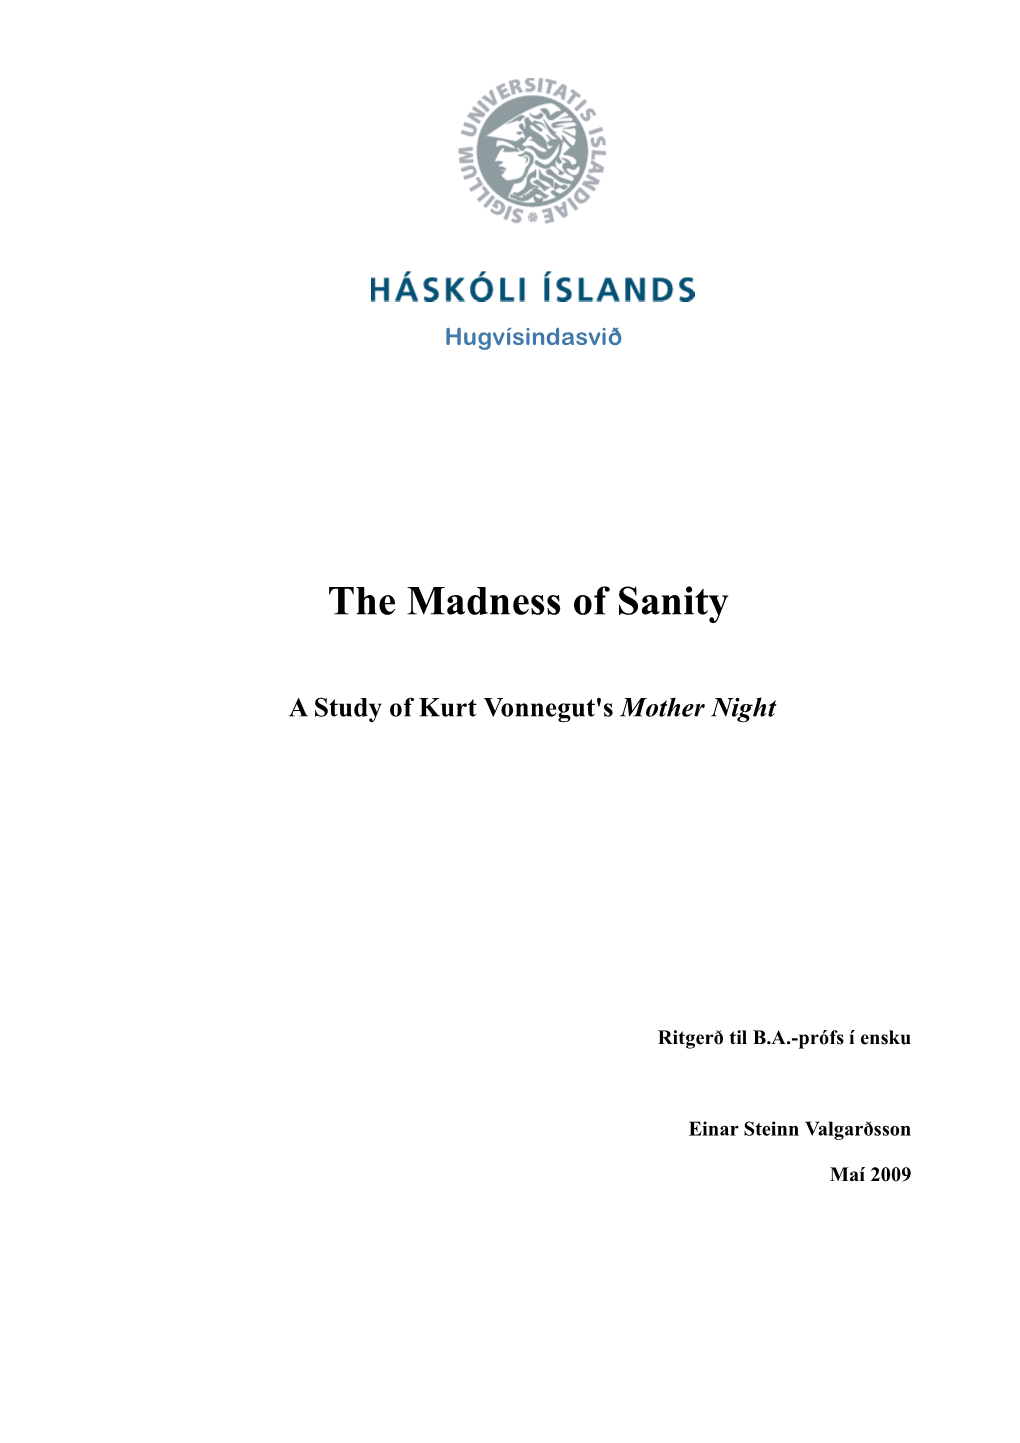 The Madness of Sanity a Study of Kurt Vonnegut's Mother Night